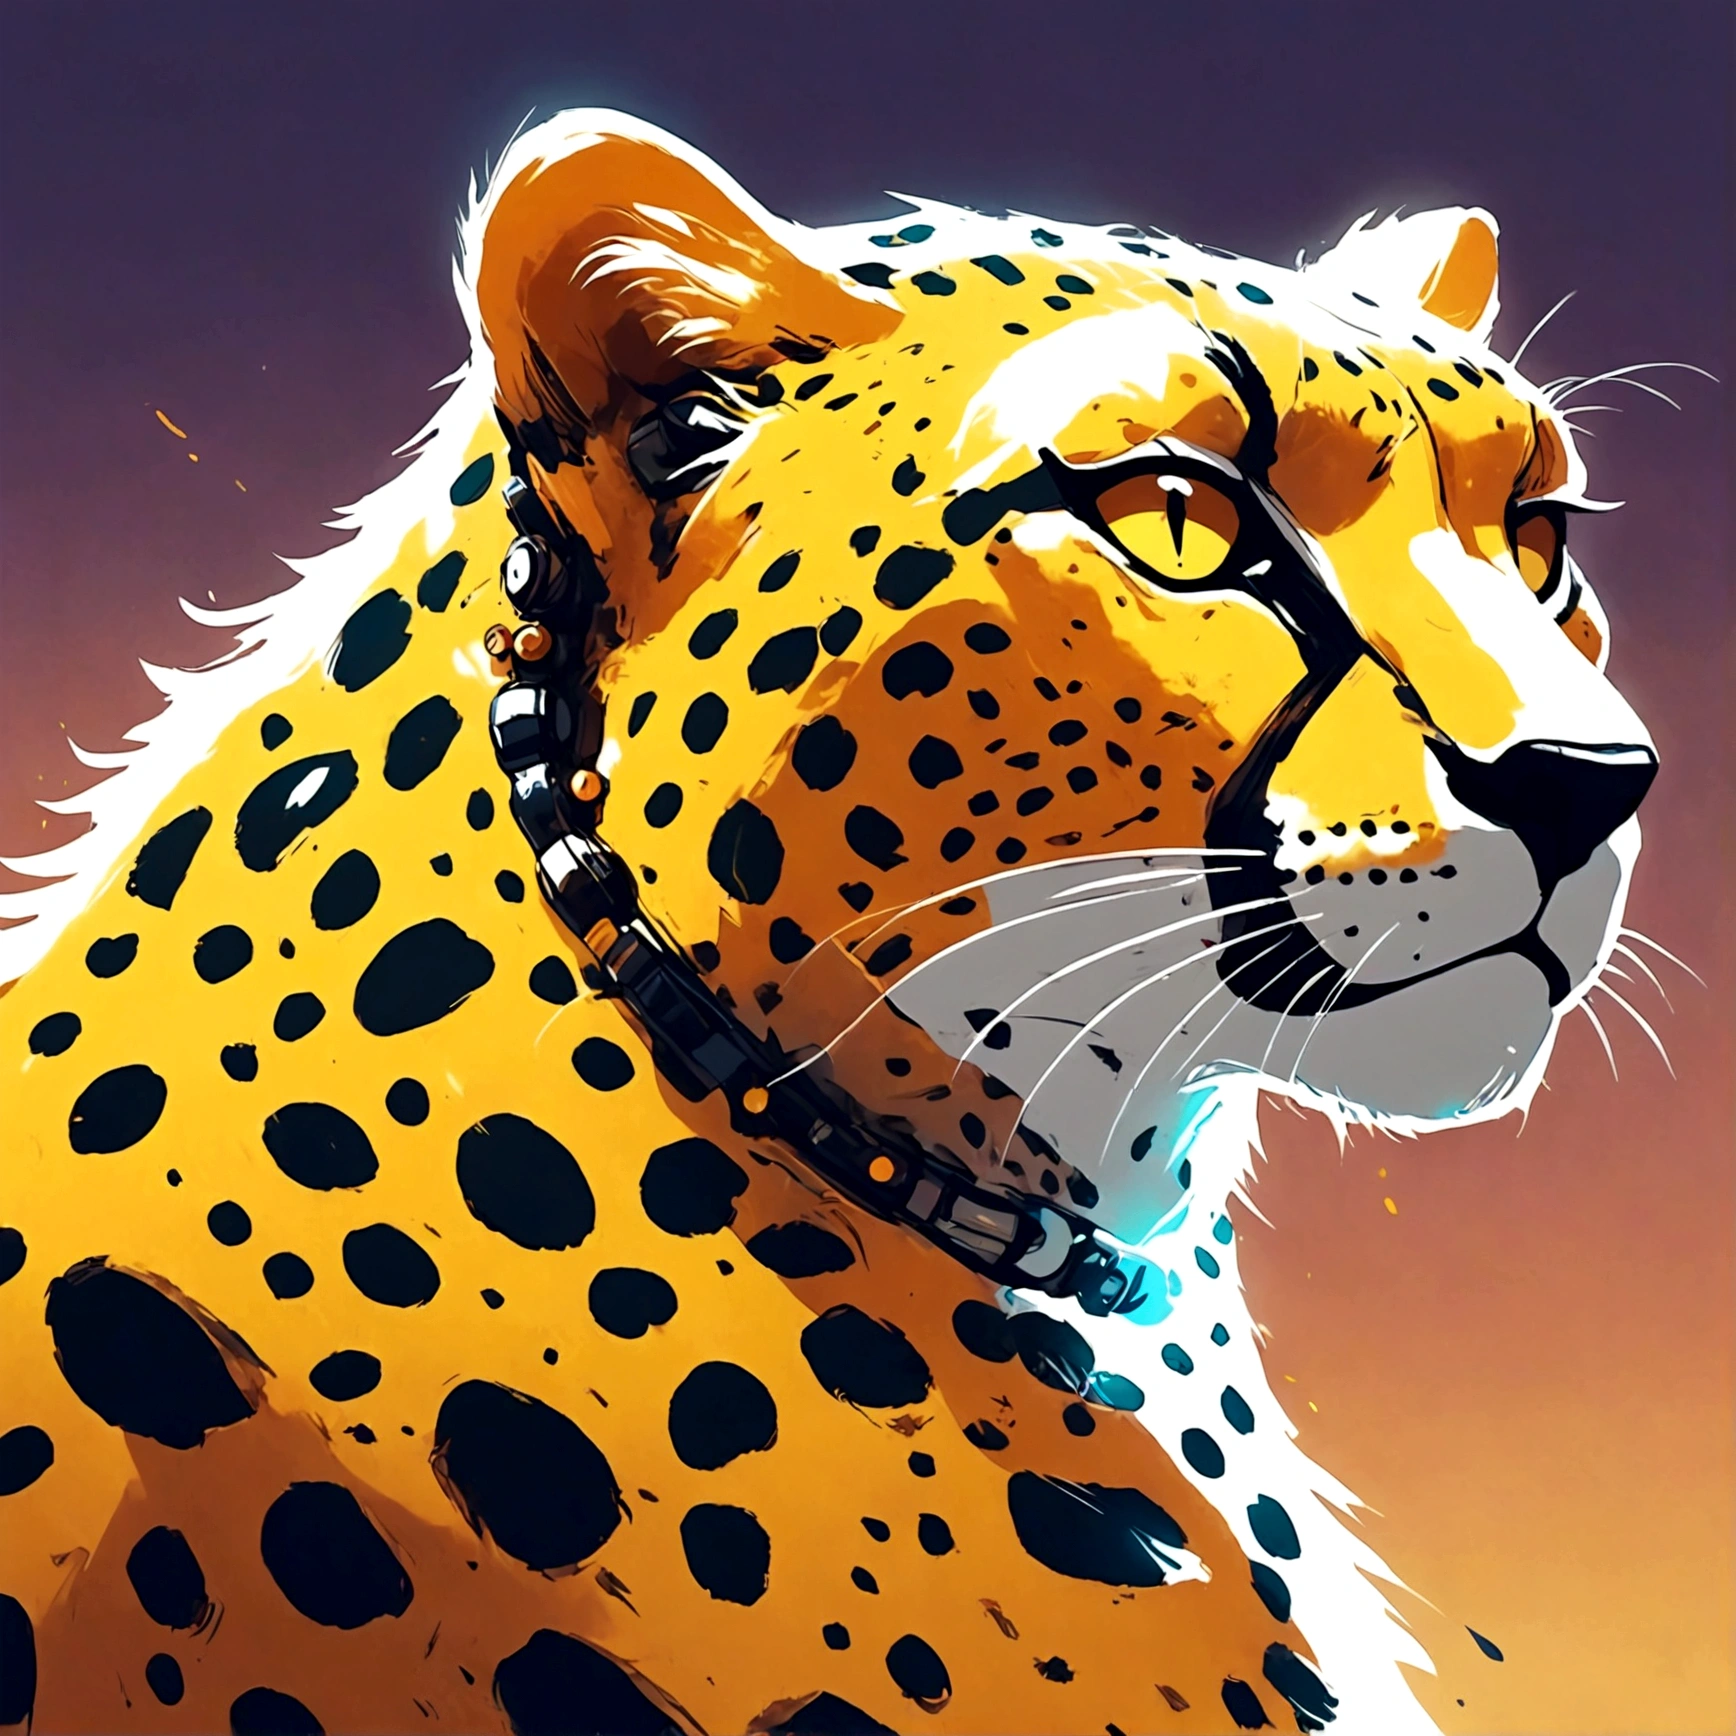 full view of mechanized cheetah in art style of Sam Bosma anime, Painting, Split Toning, Electric Colors, Kodachrome, 2D, 4k, HDR, Curve,
